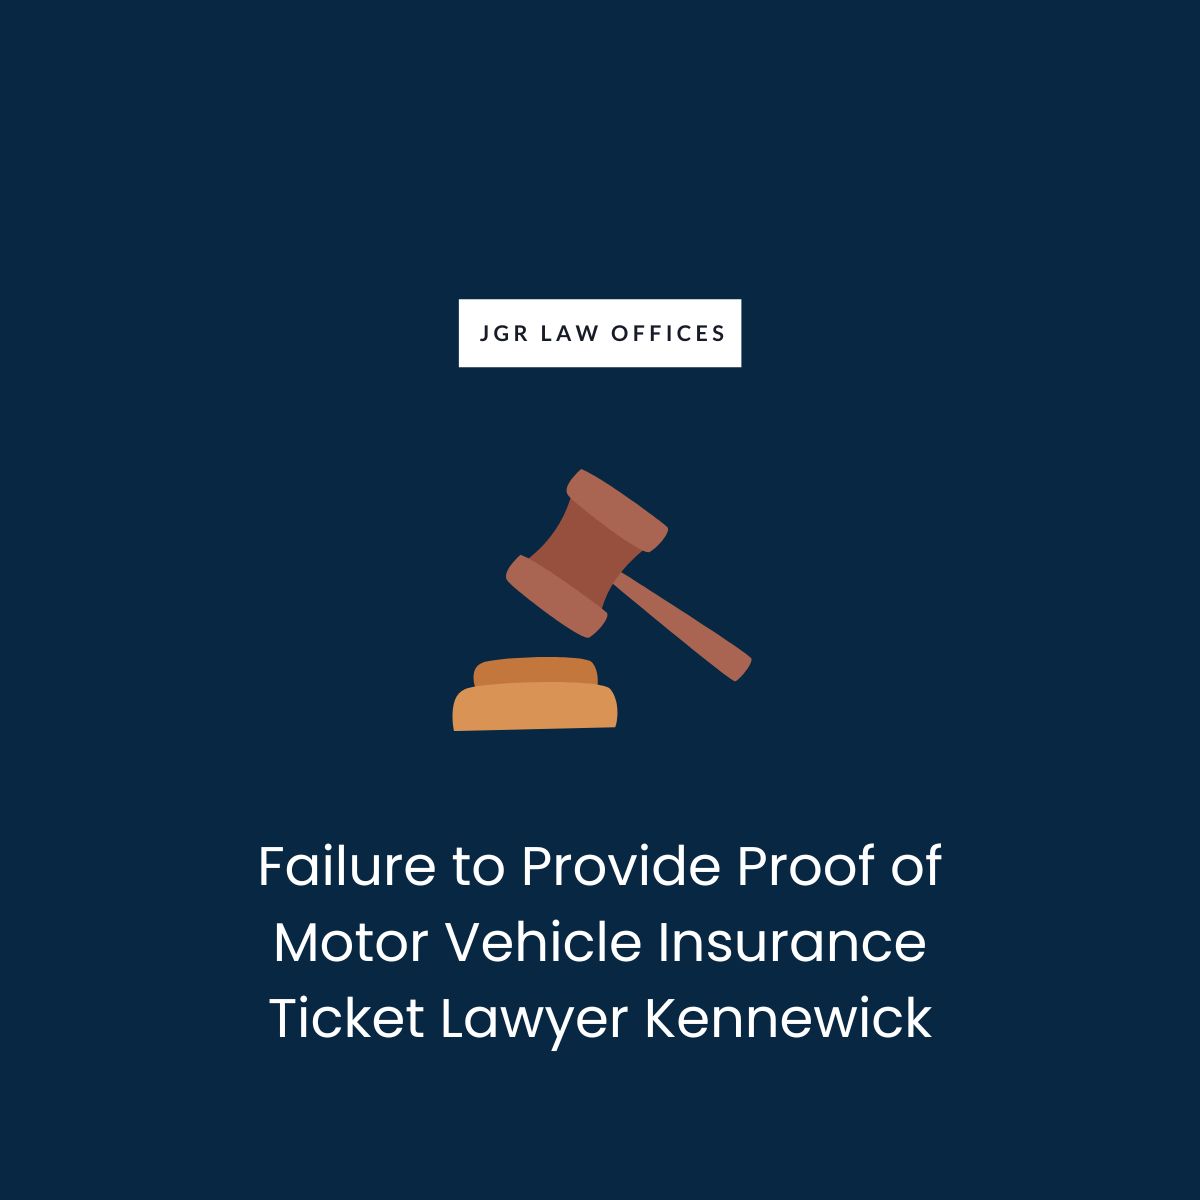 Failure to Provide Proof of Motor Vehicle Insurance Ticket Attorney Kennewick